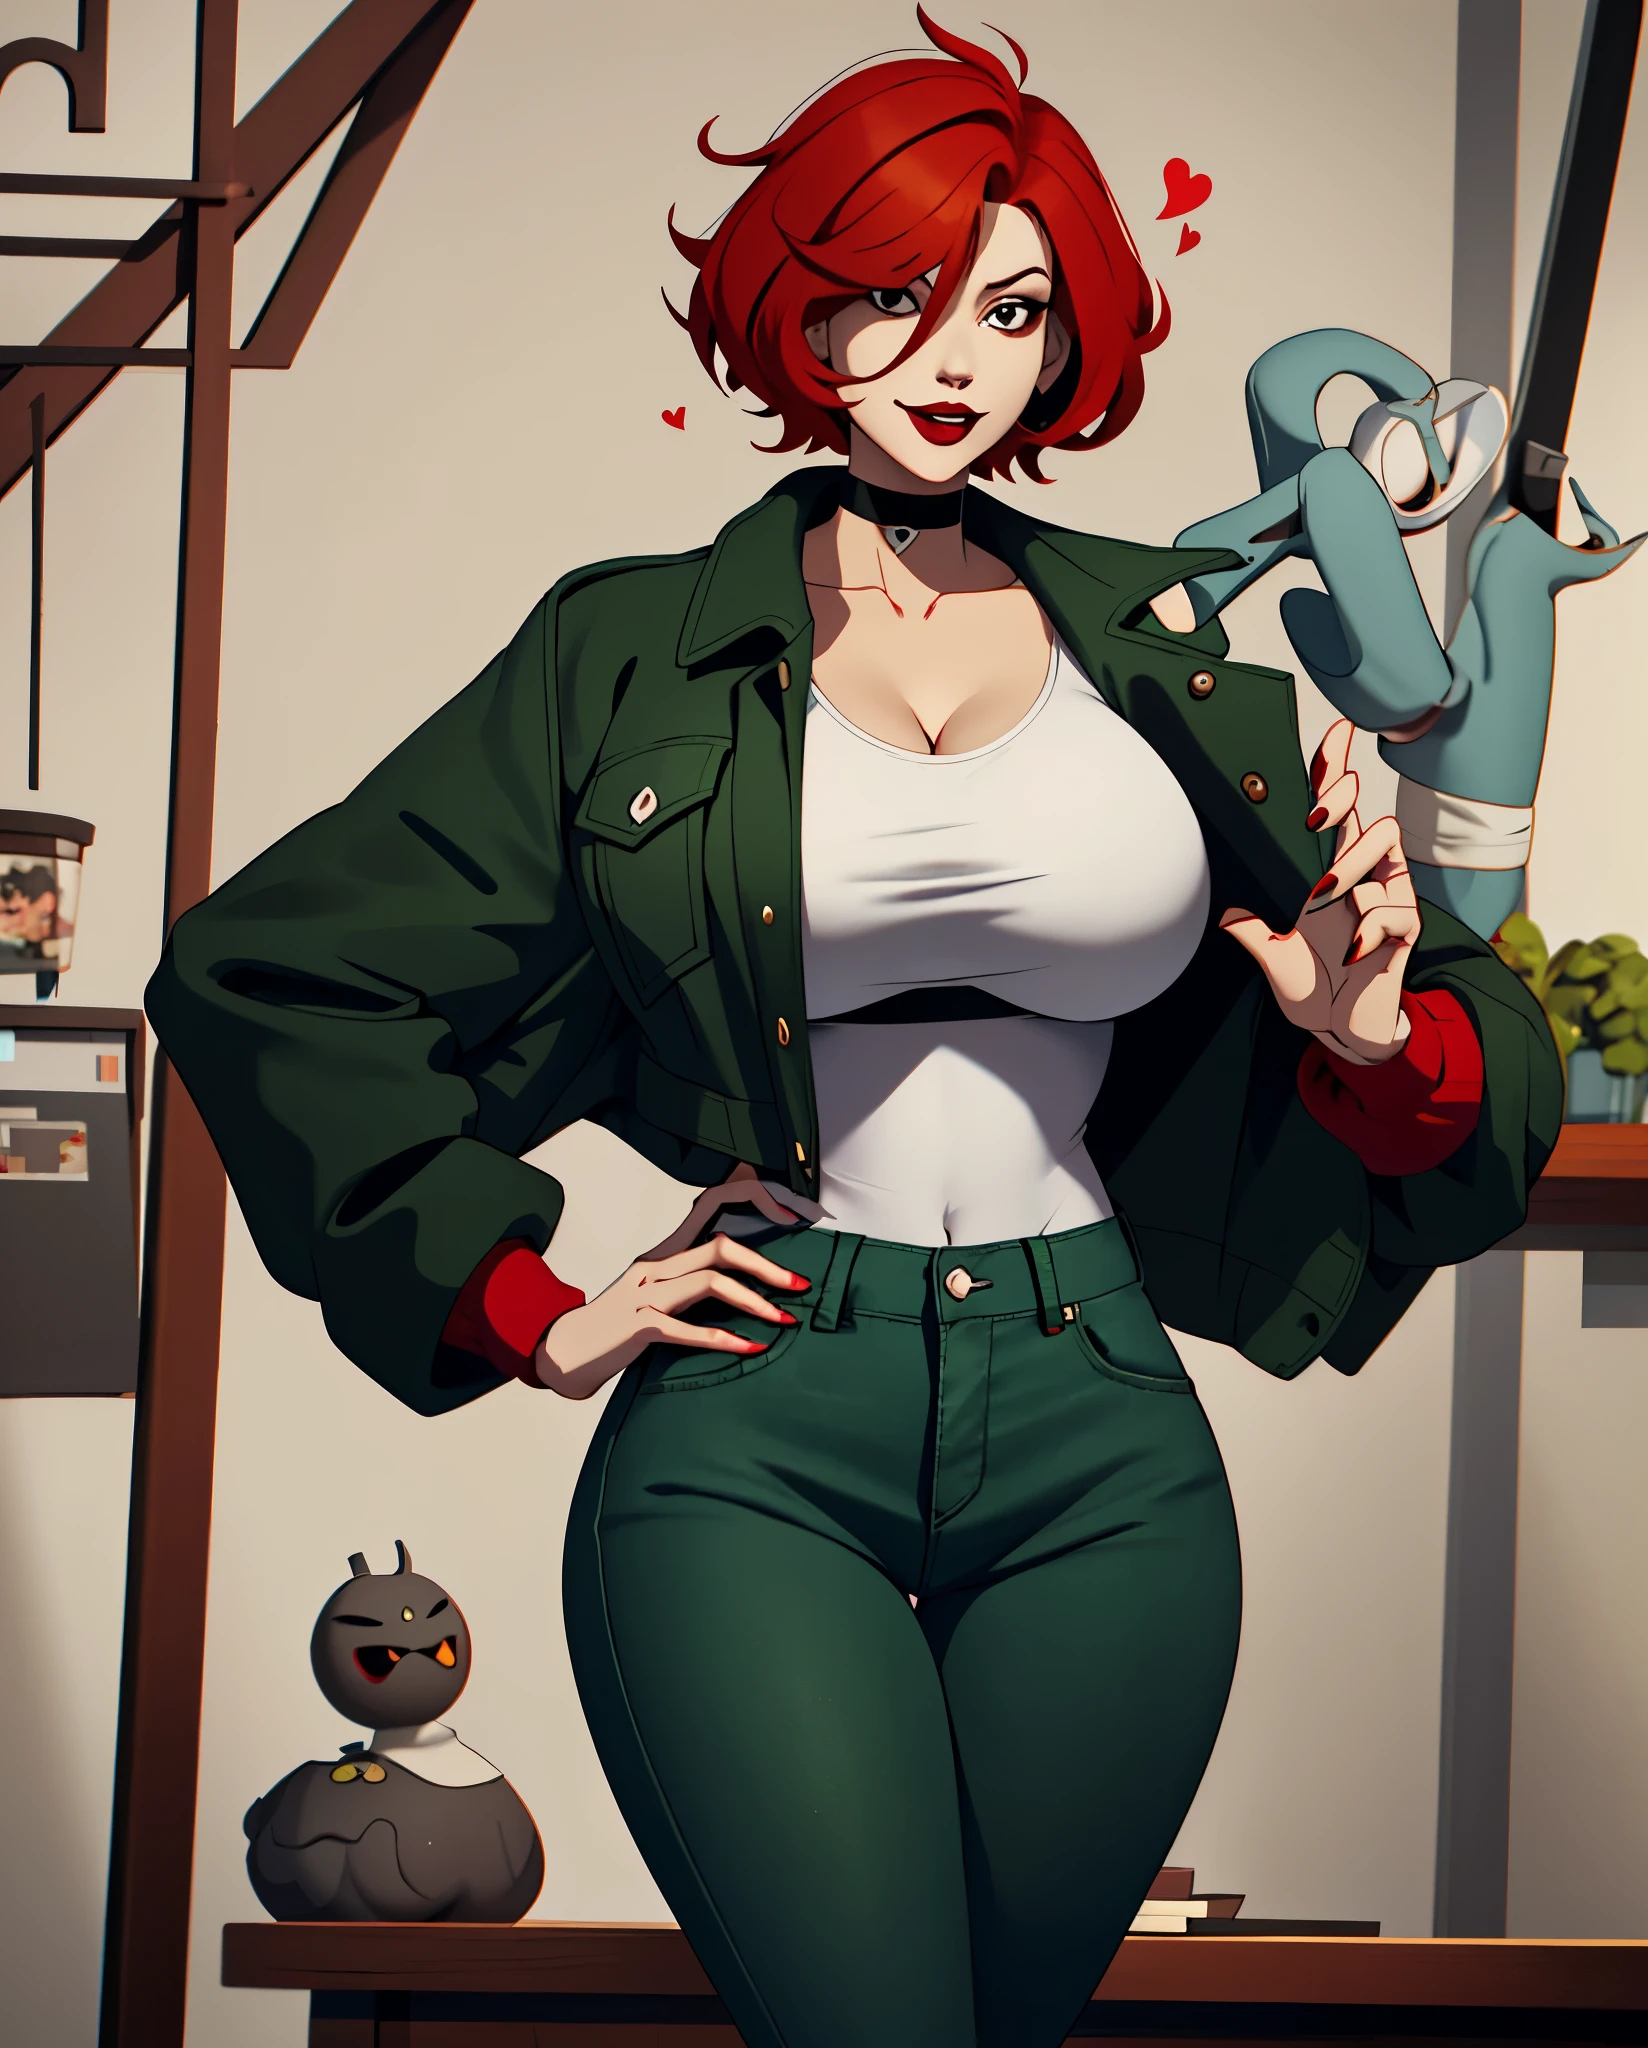 A woman with short, red hair and white tips. She has brown eyes and is wearing black lipstick. She has a slim body and is dressed in a green jacket and jeans. Big thighs, huge , massive , big breast, thicc, sexy, suggestive, flirty face, submissive, hearts in eyes, nsfw 🥵